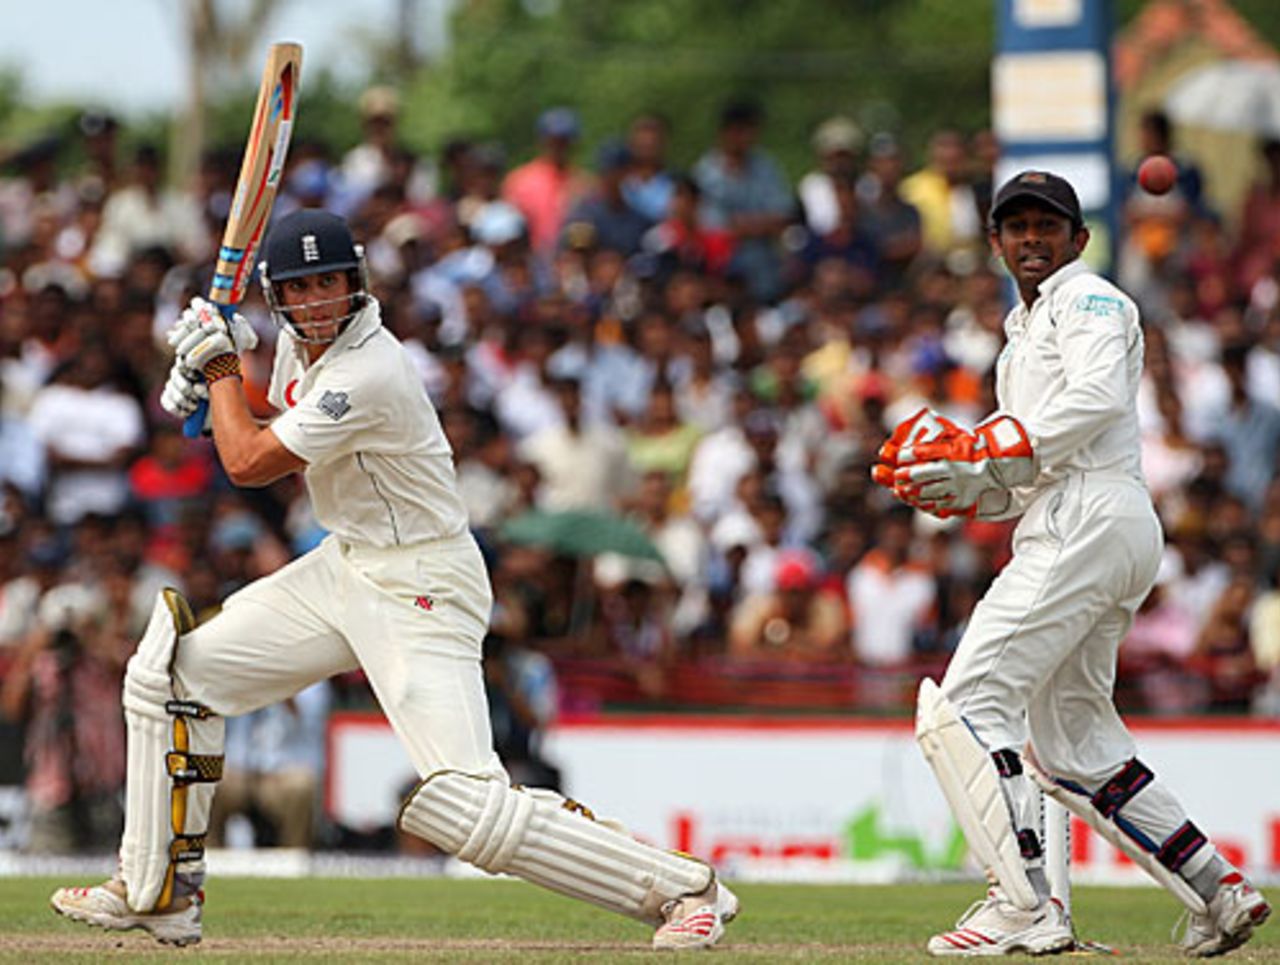 Alastair Cook cuts behind square during his hundred, Sri Lanka v England, 3rd Test, Galle, 5th day, December 22 2007